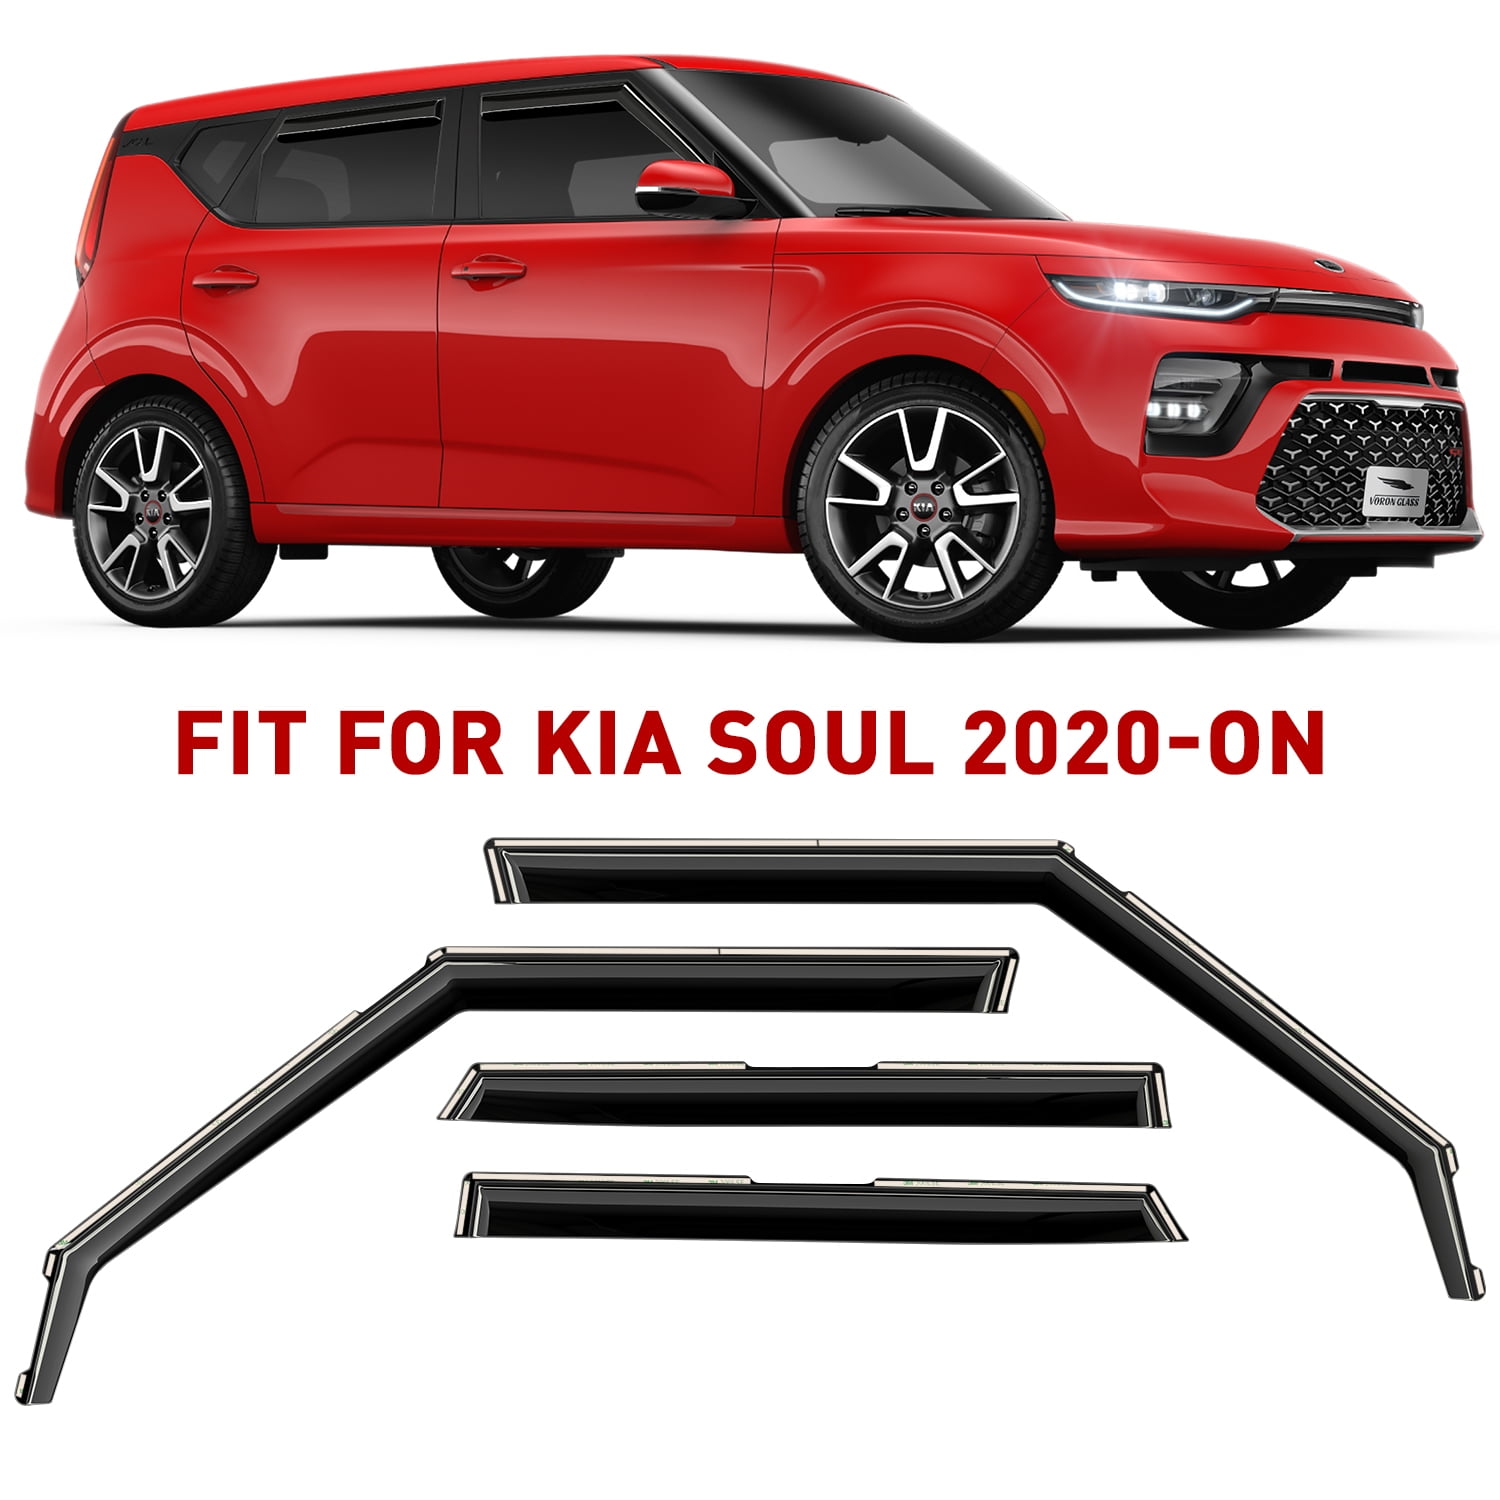 Voron Glass in-Channel Extra Durable Rain Guards for Kia Soul 2020